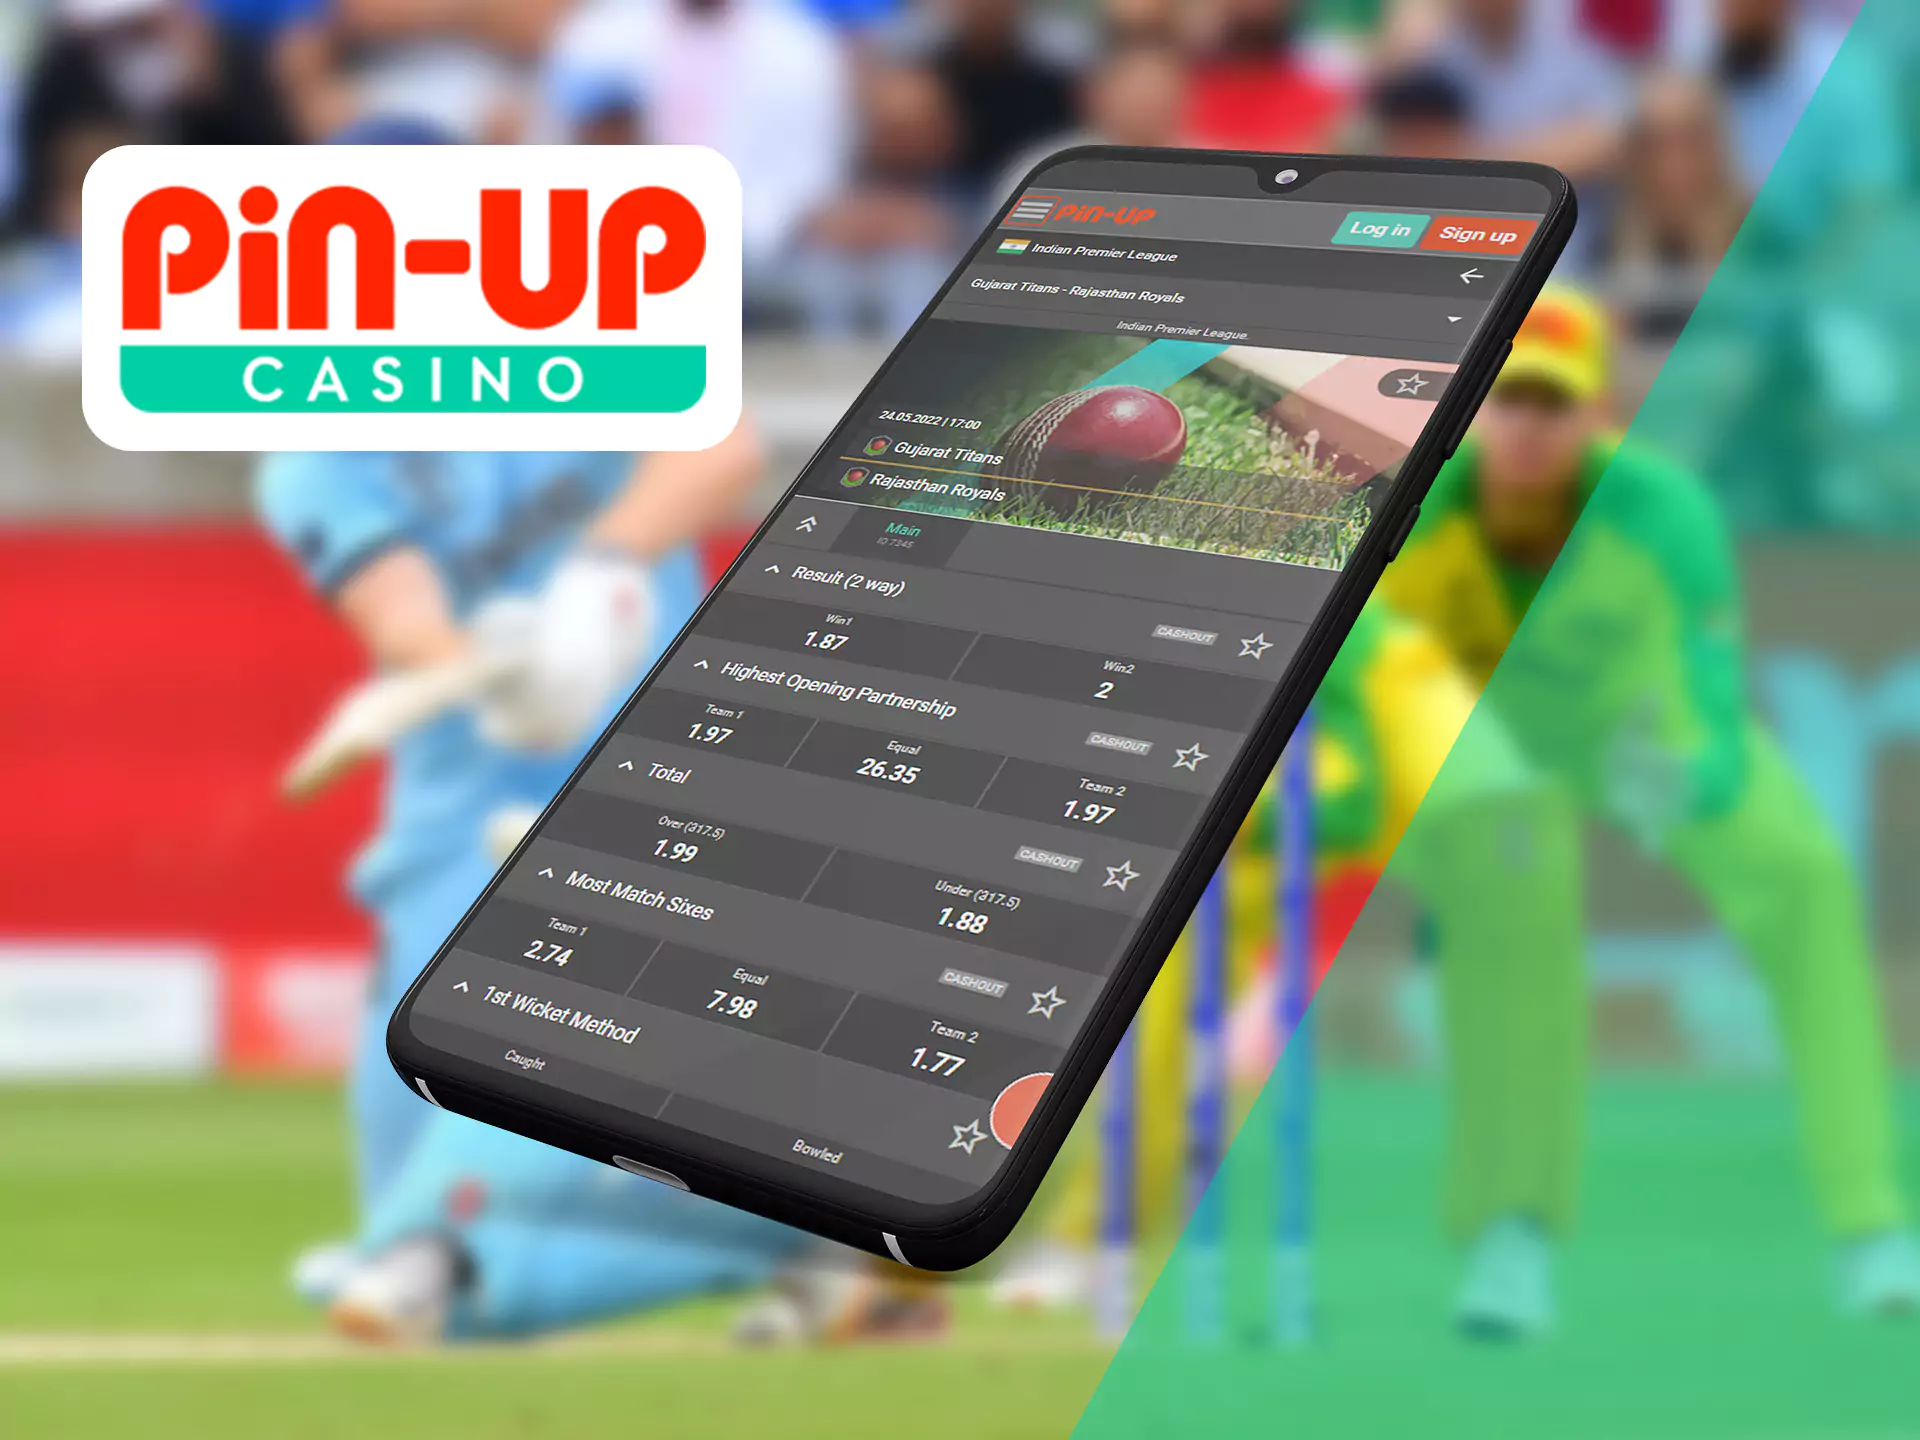 Place bets on cricket matches easily in the Pin-Up app.